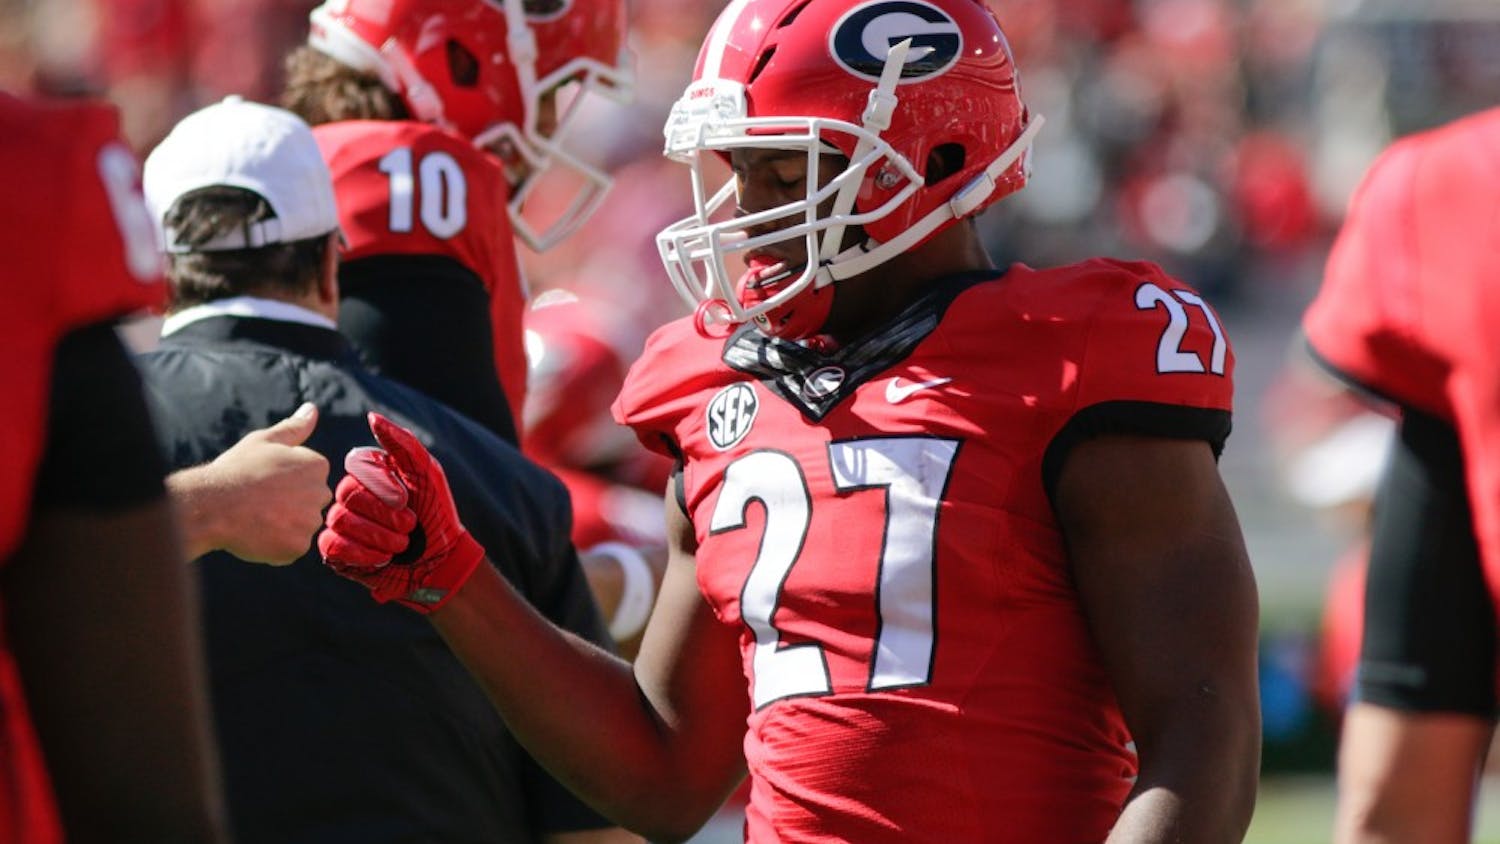 Georgia tailback Nick Chubb (27) fist bumps a teamate during pre-game warmups before the start of Georgia's regular season game versus the University of Tennessee at Sanford Stadium on Oct. 1, 2016 in Athens, Ga. (Photo/Thomas Mills)